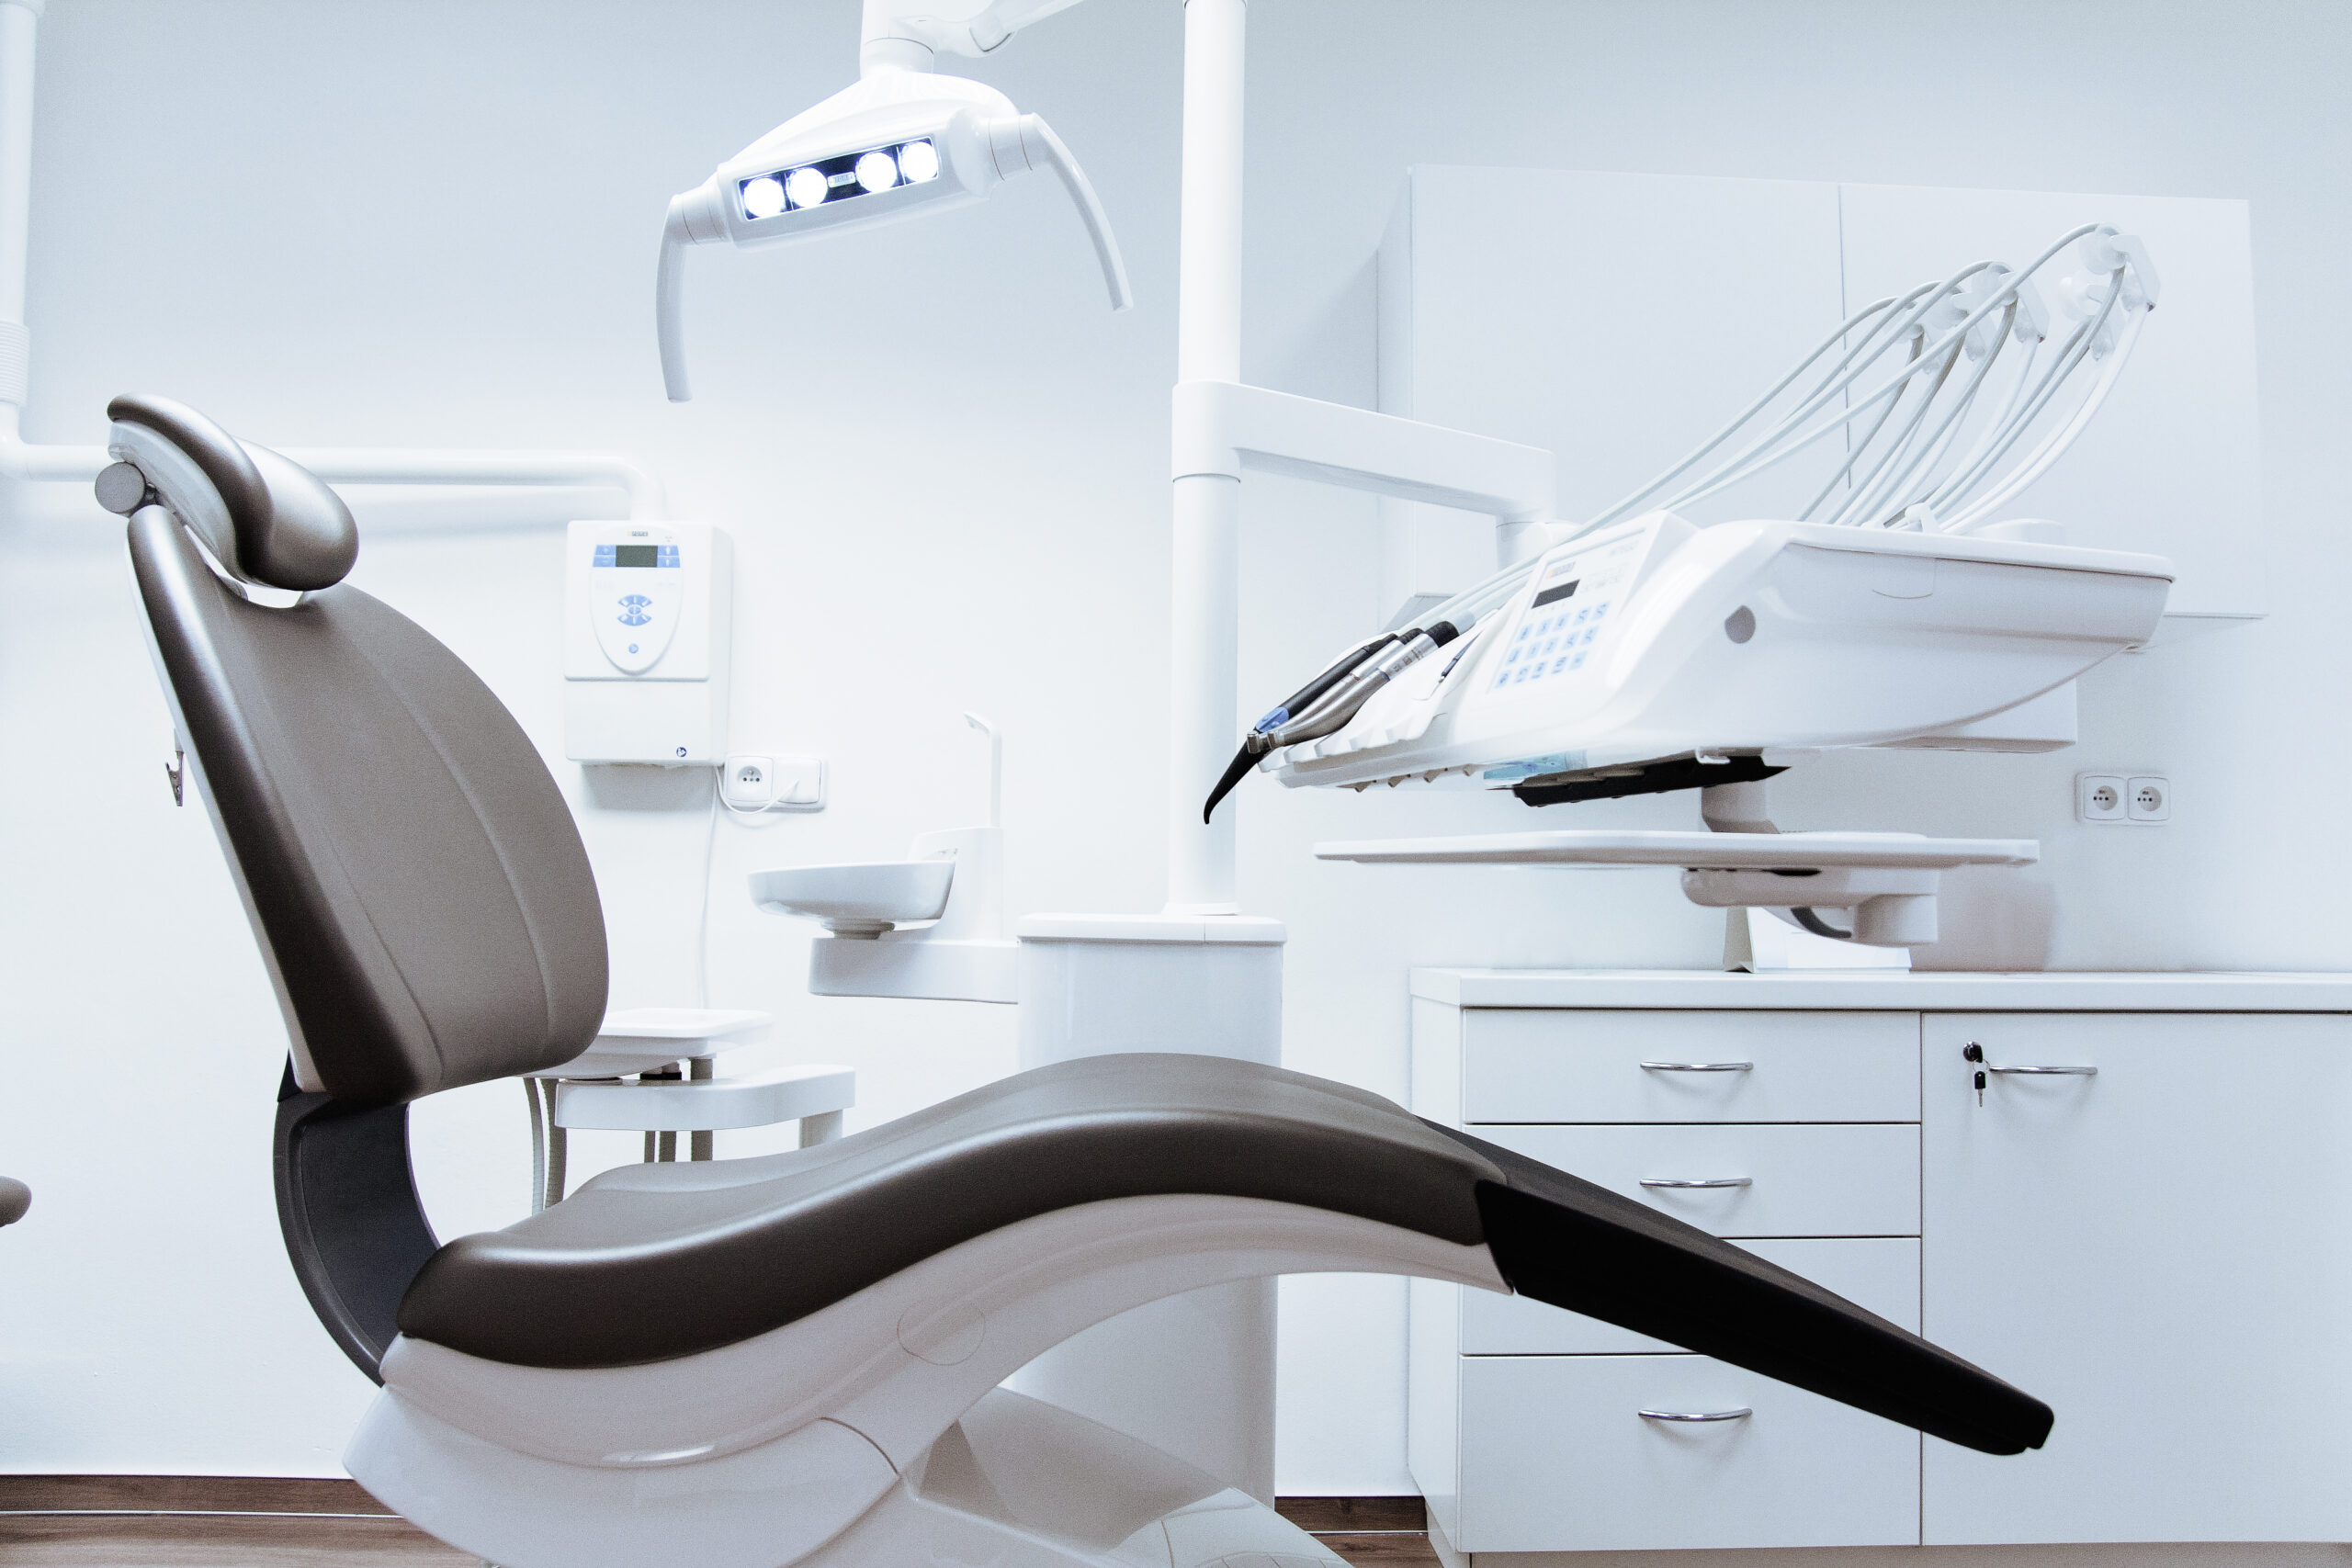 Dental Practice Acquisition or Starting from Scratch?